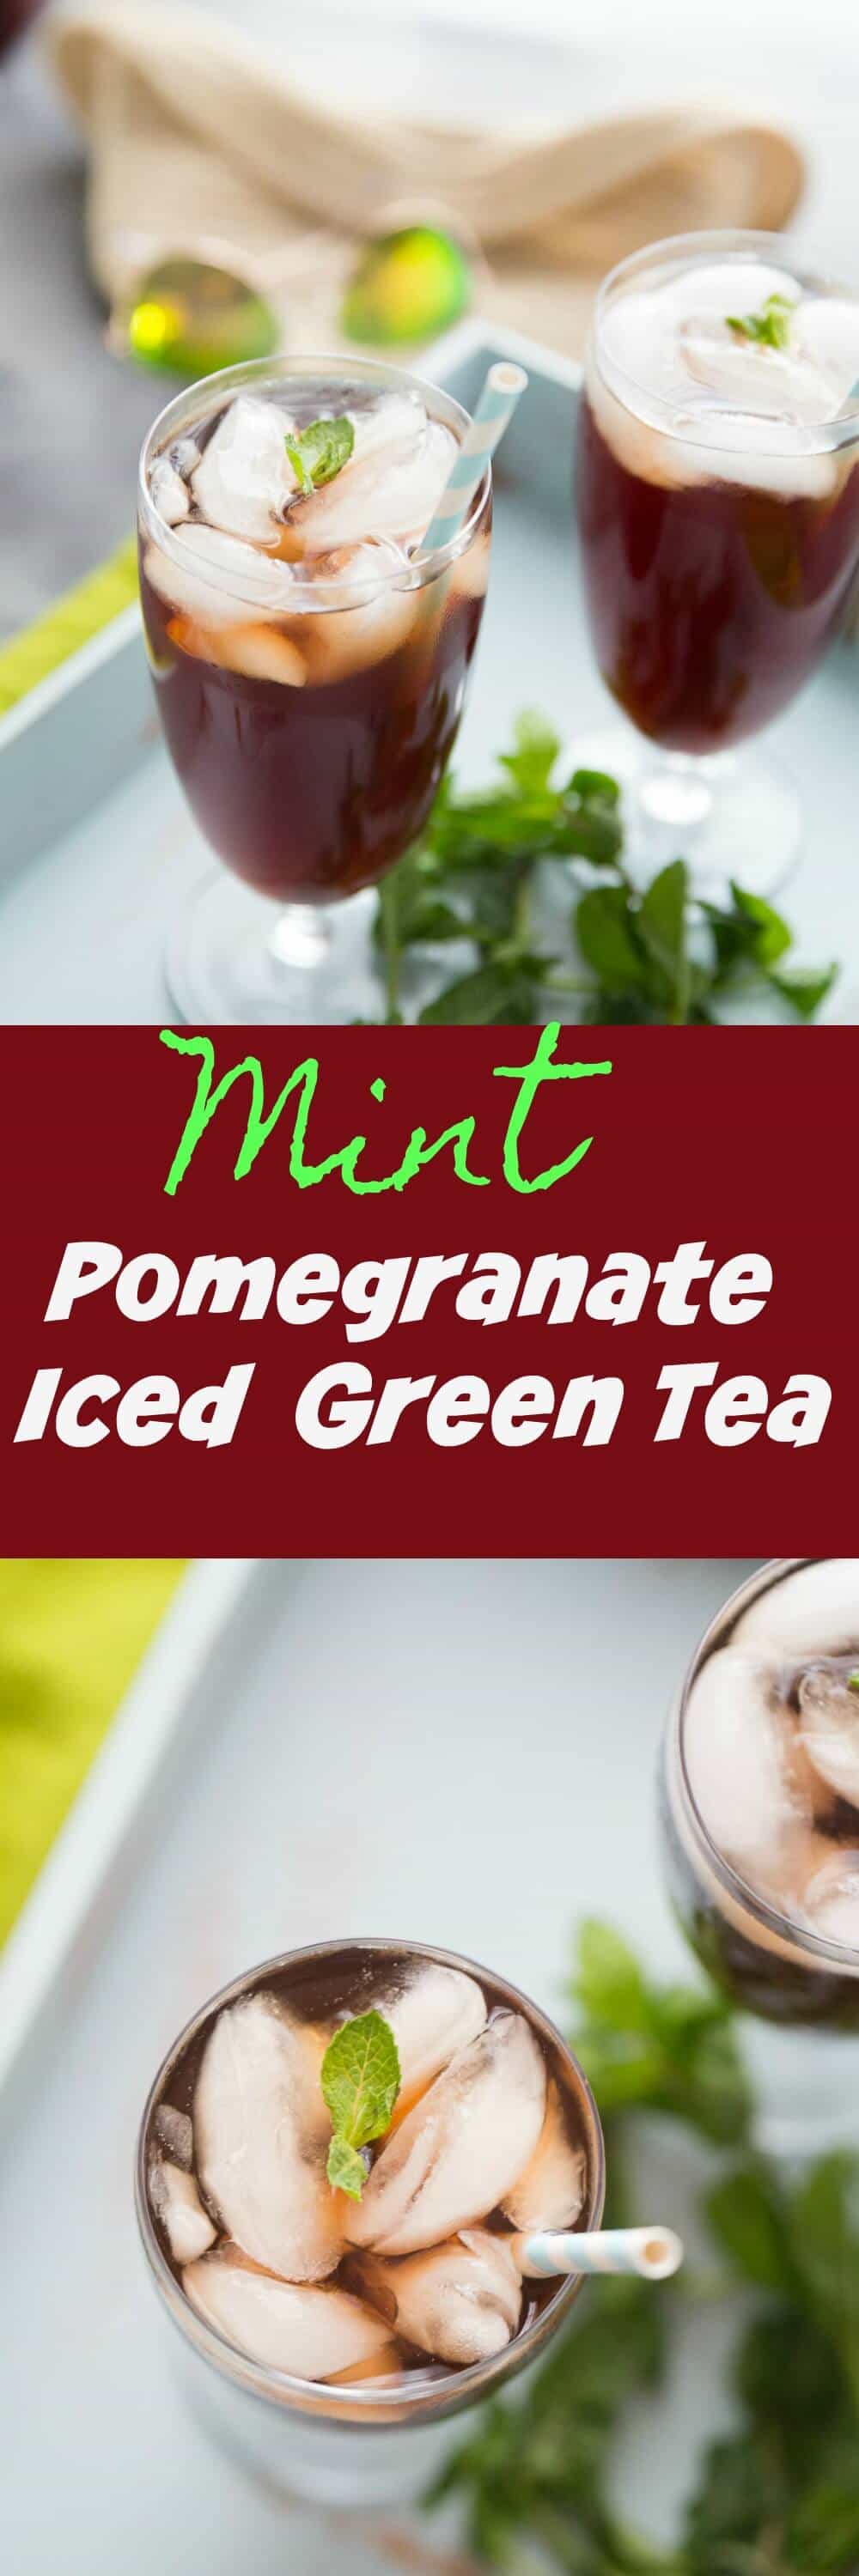 This pomegranate iced tea is the perfect midday pick me up! It is tart, slightly sweet and absolutely refreshing!